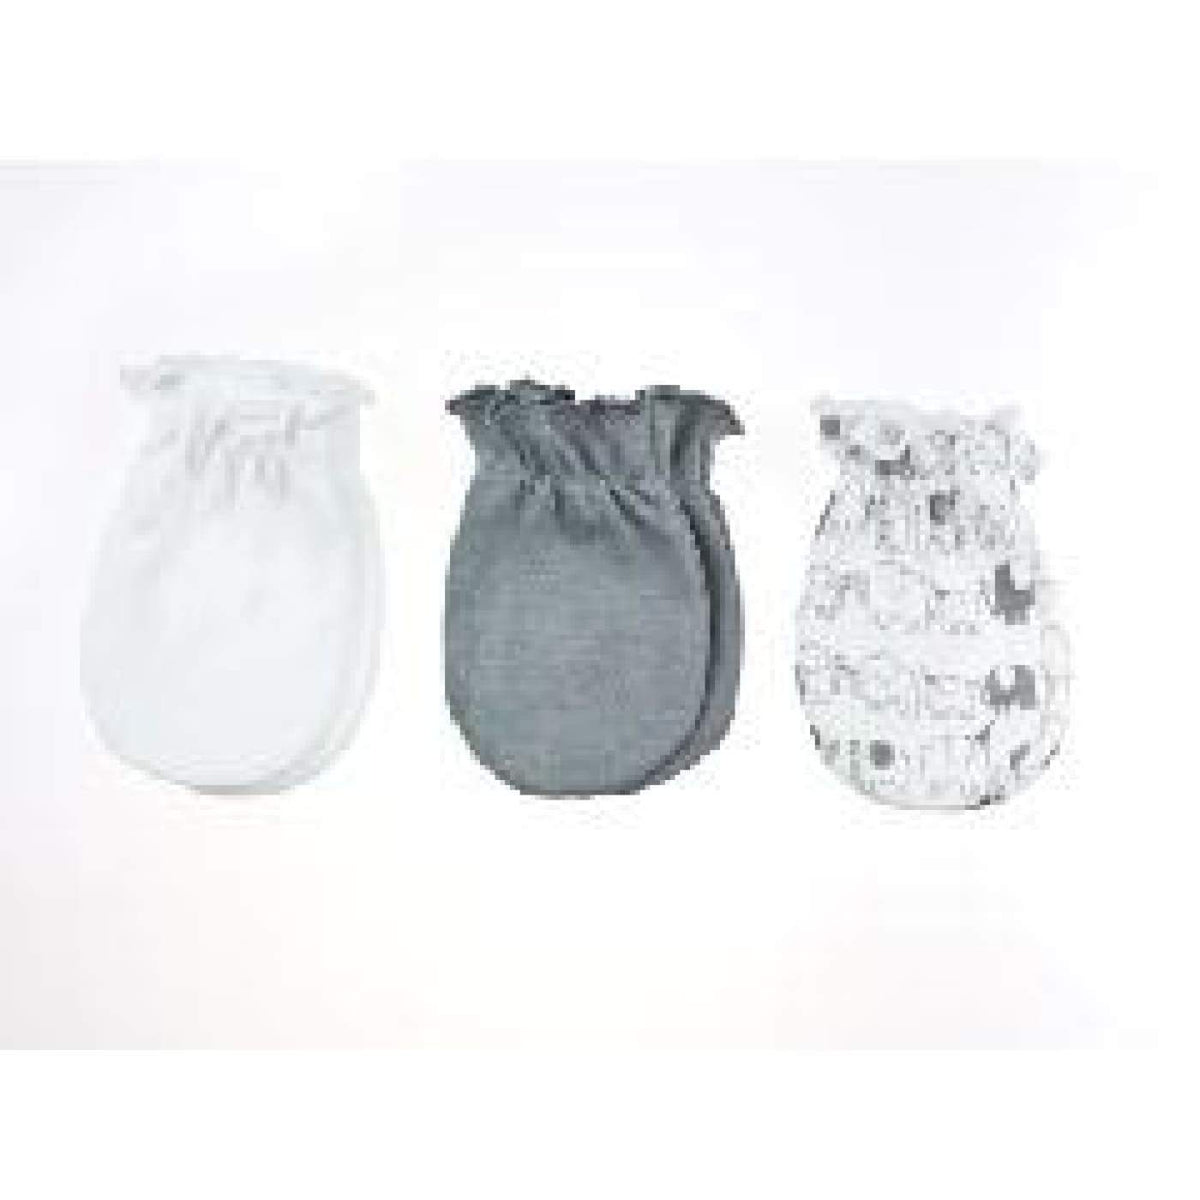 Playette Mittens - Elephant/Grey/White 0-6M 3PK - BABY &amp; TODDLER CLOTHING - MITTENS/SOCKS/SHOES